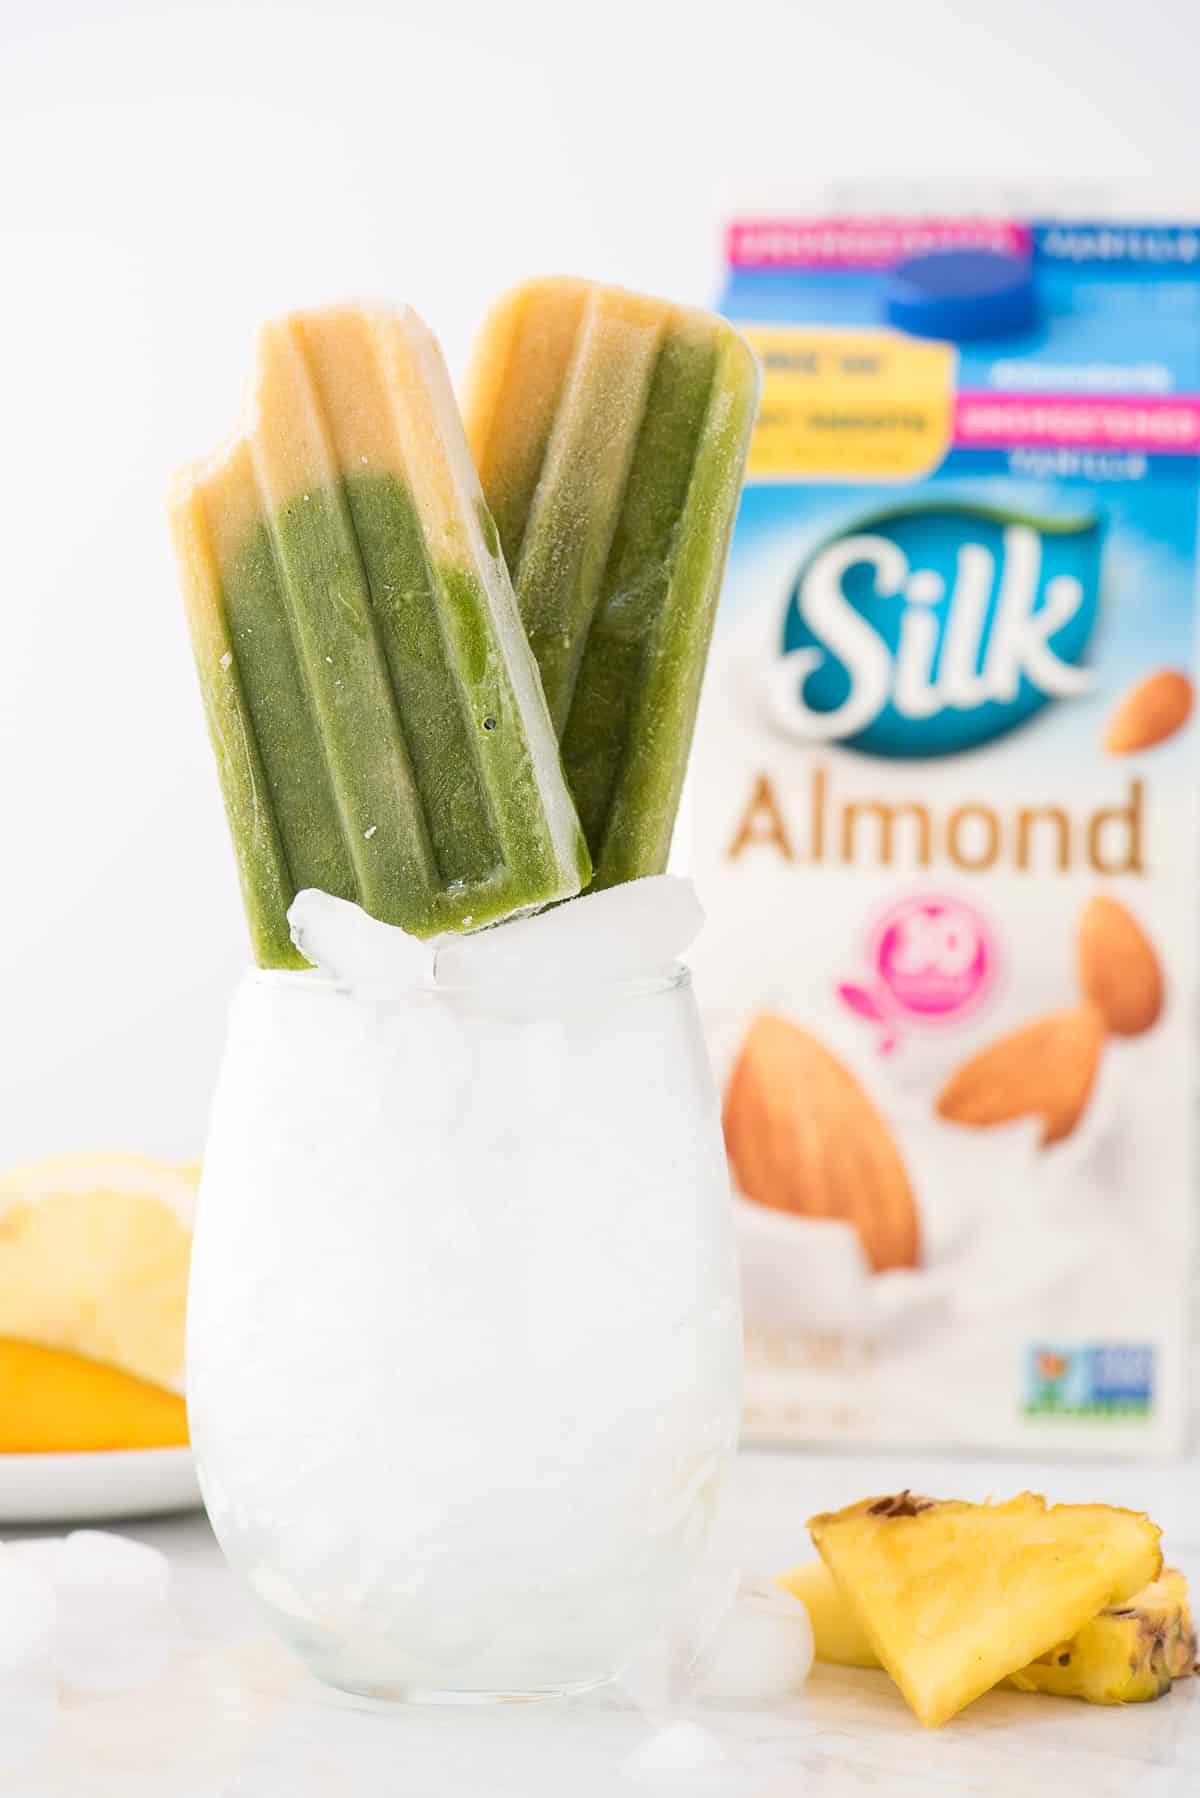 green spinach and mango popsicles propped up in a glass with ice. Container of silk almondmilk in the background. 